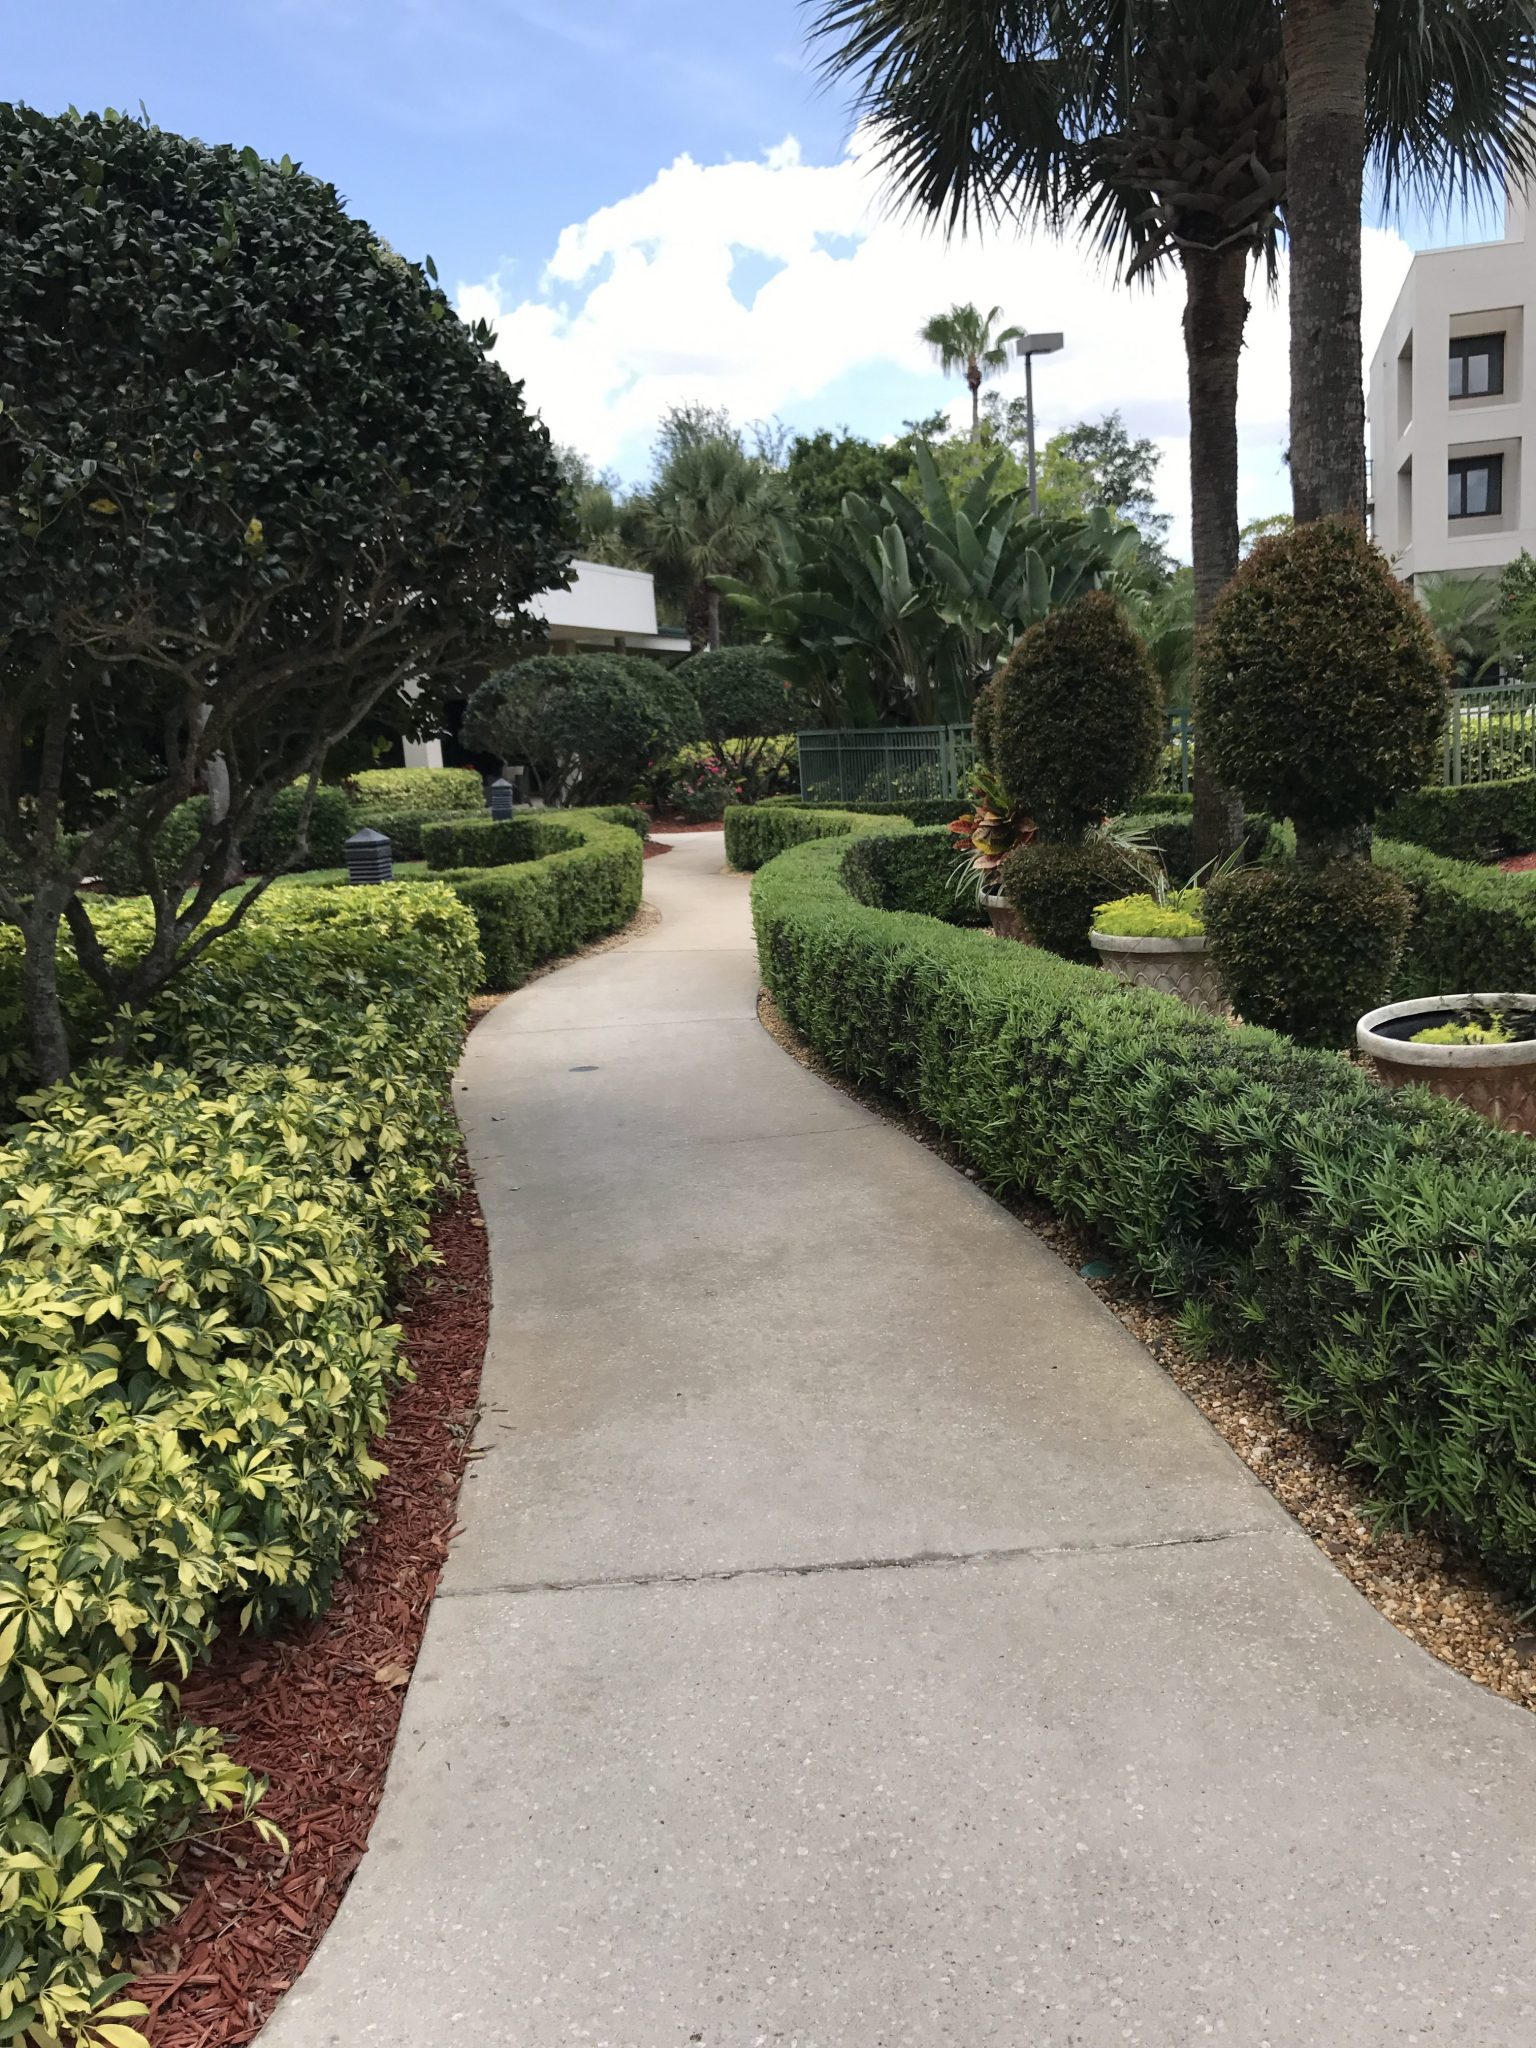 Our Stay at Orlando World Center Marriott by popular New Jersey travel blogger Fit Mommy in Heels